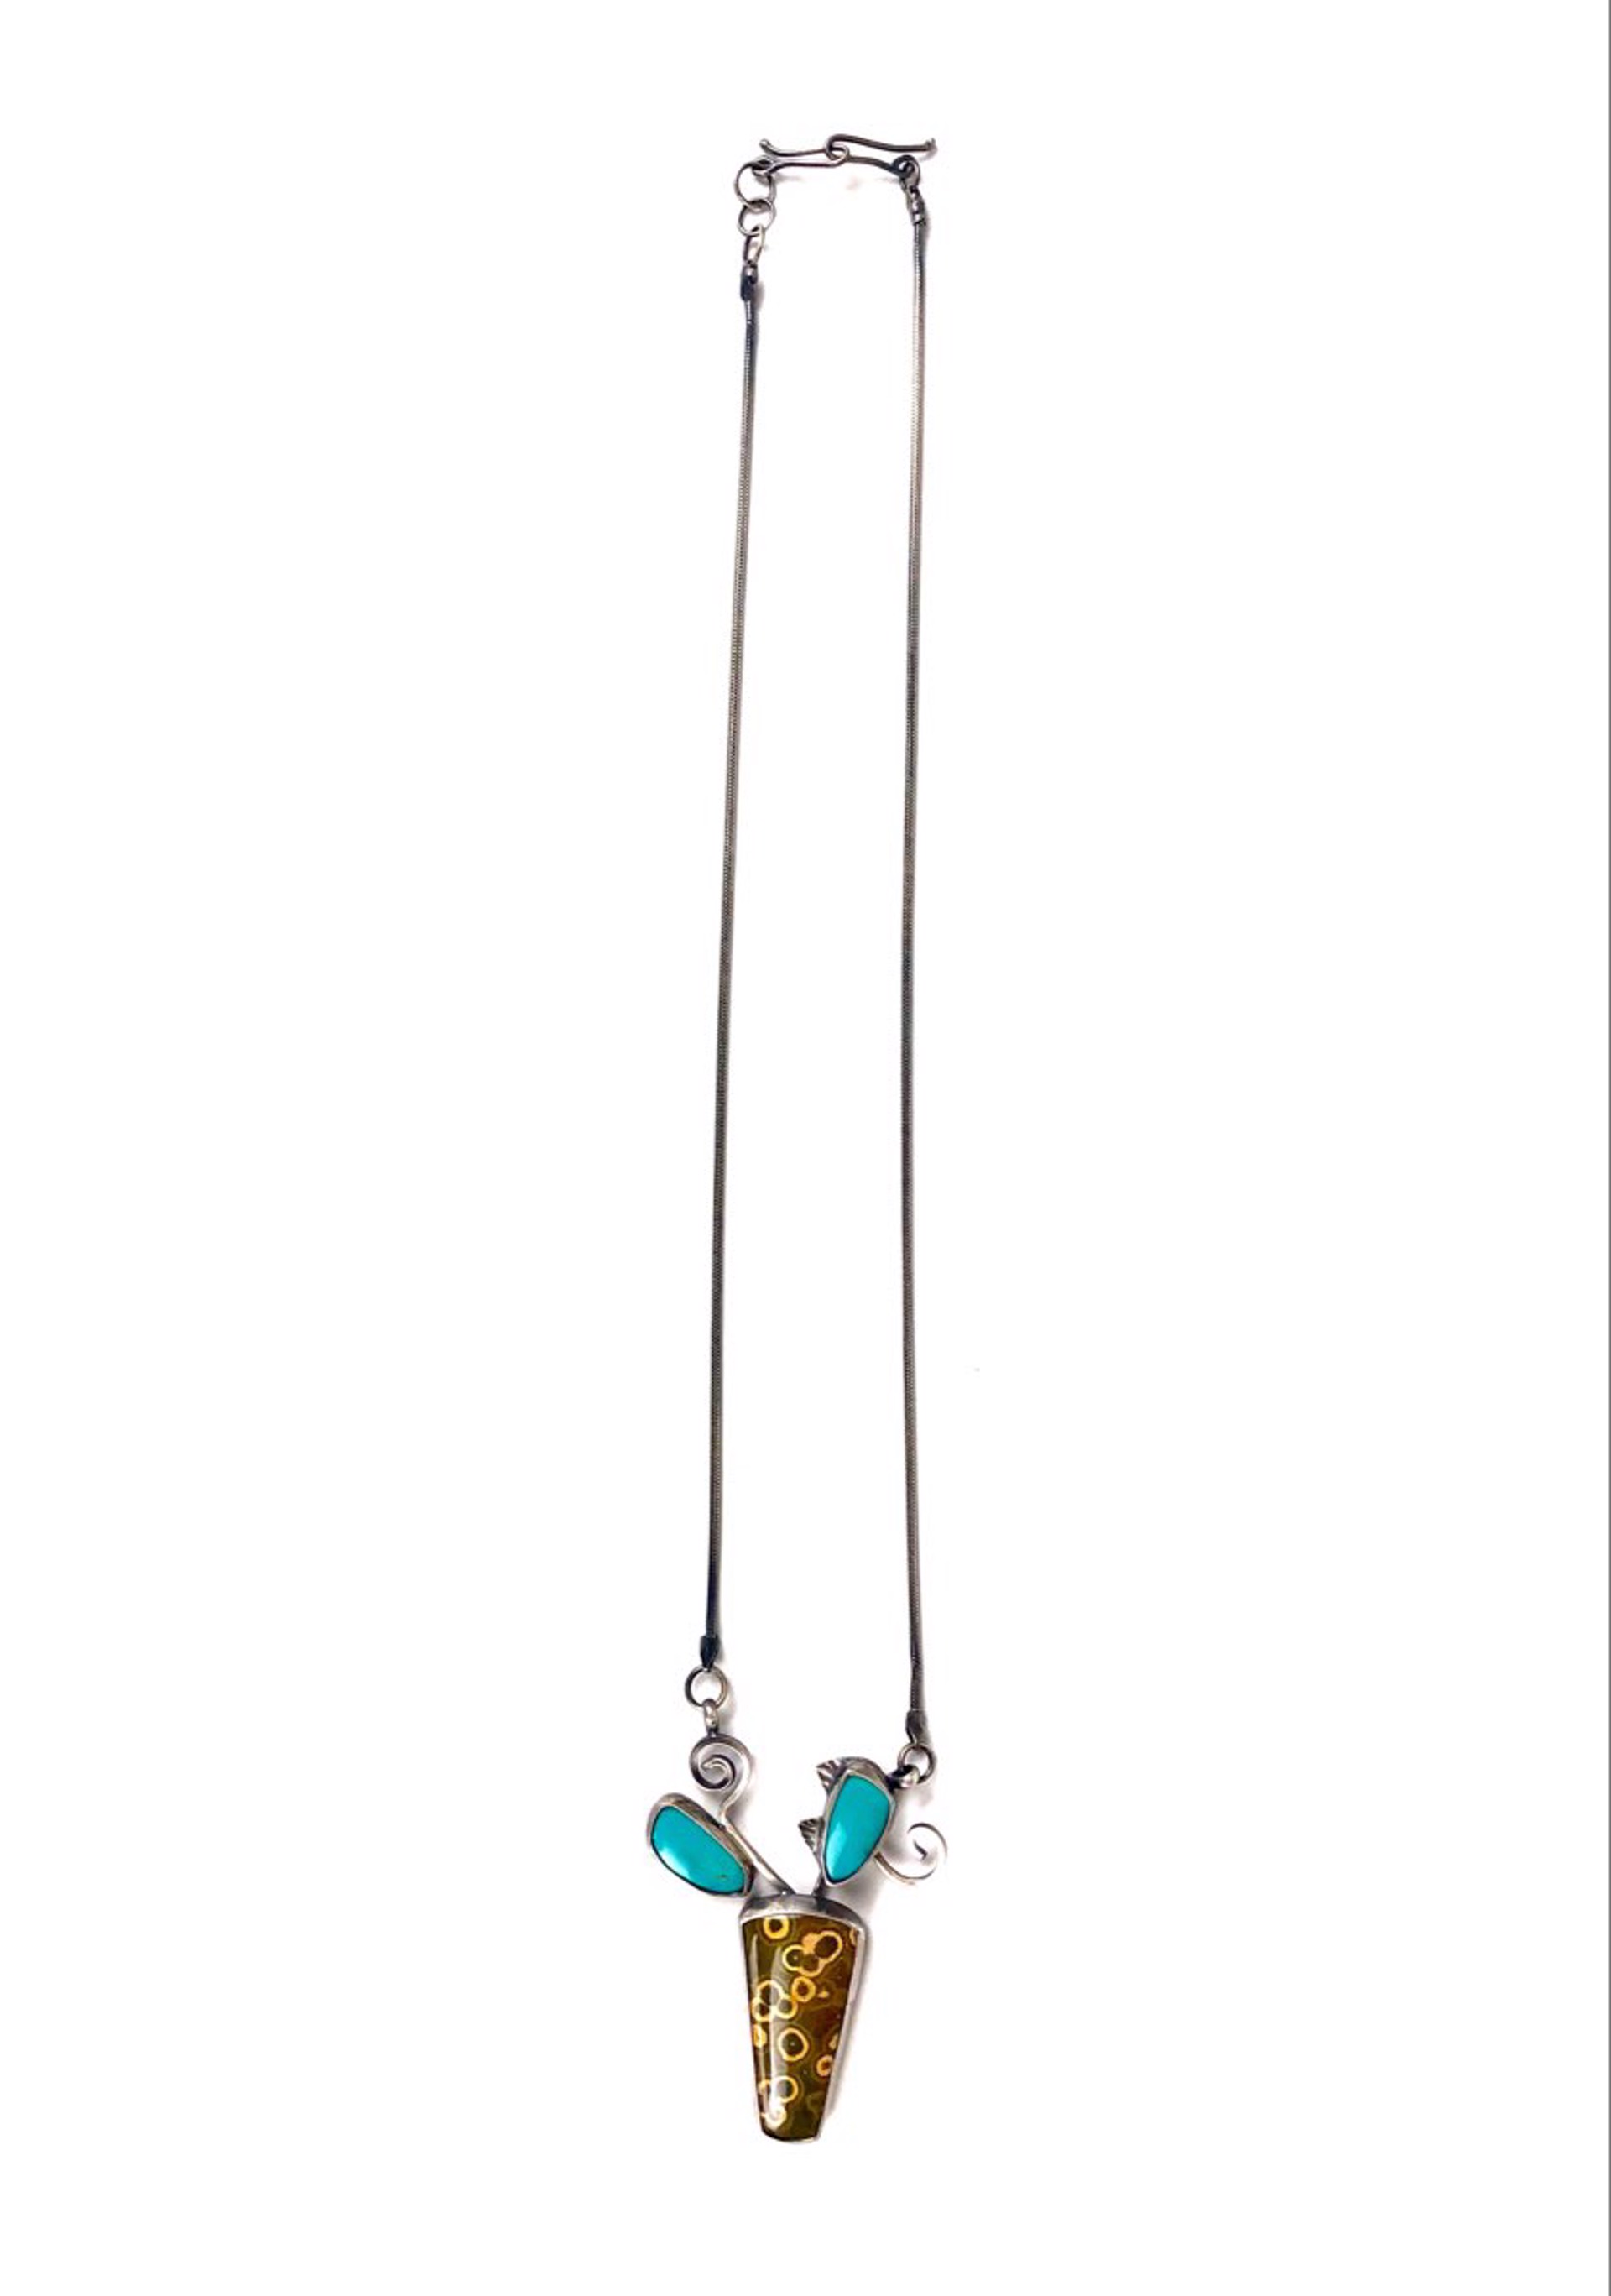 Jasper, Turquoise, and Sterling Silver Necklace by Anne Rob